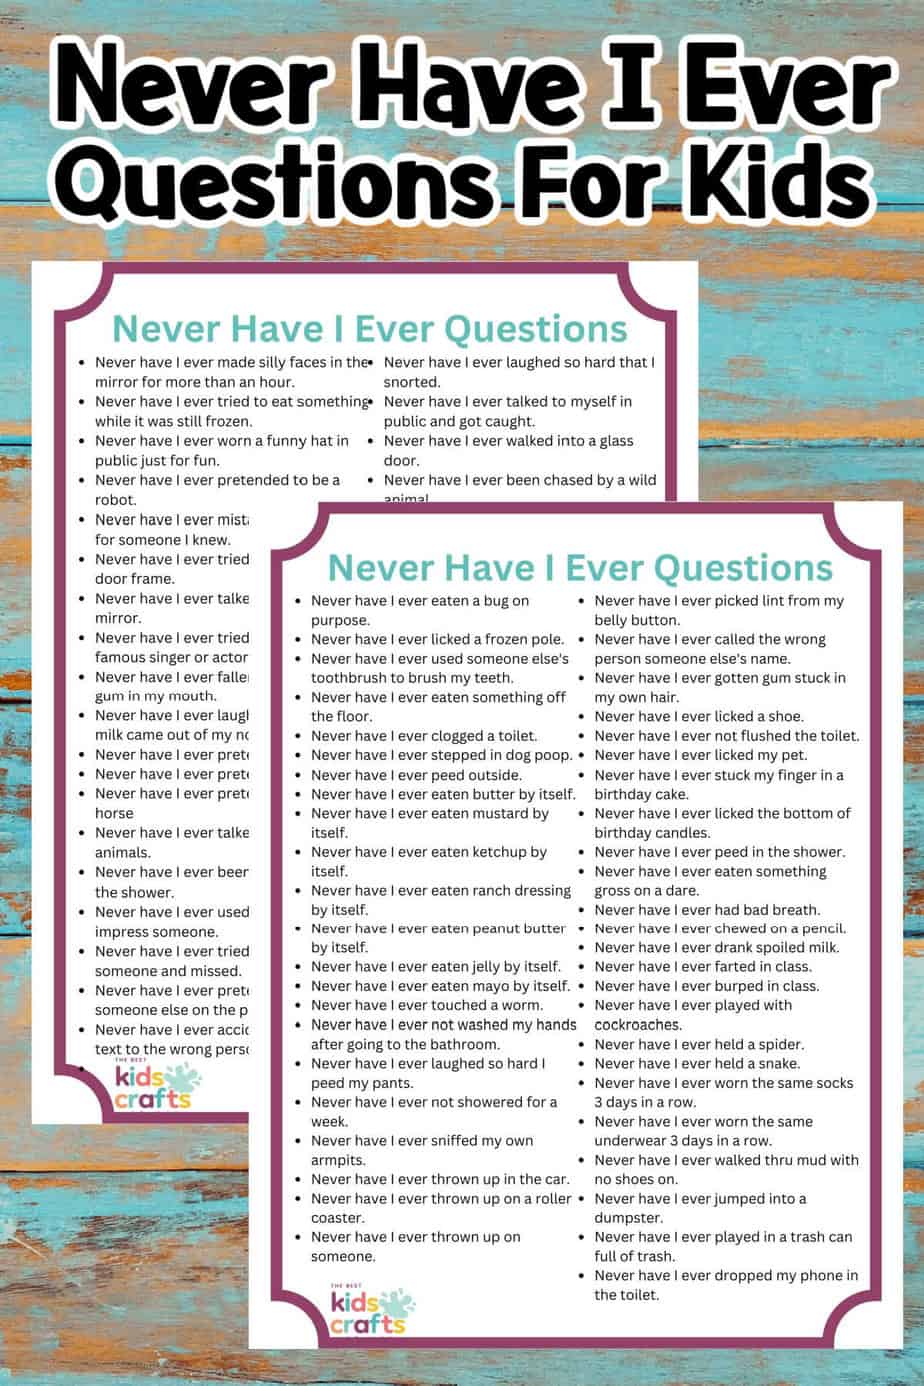 never have i ever questions for kids printable